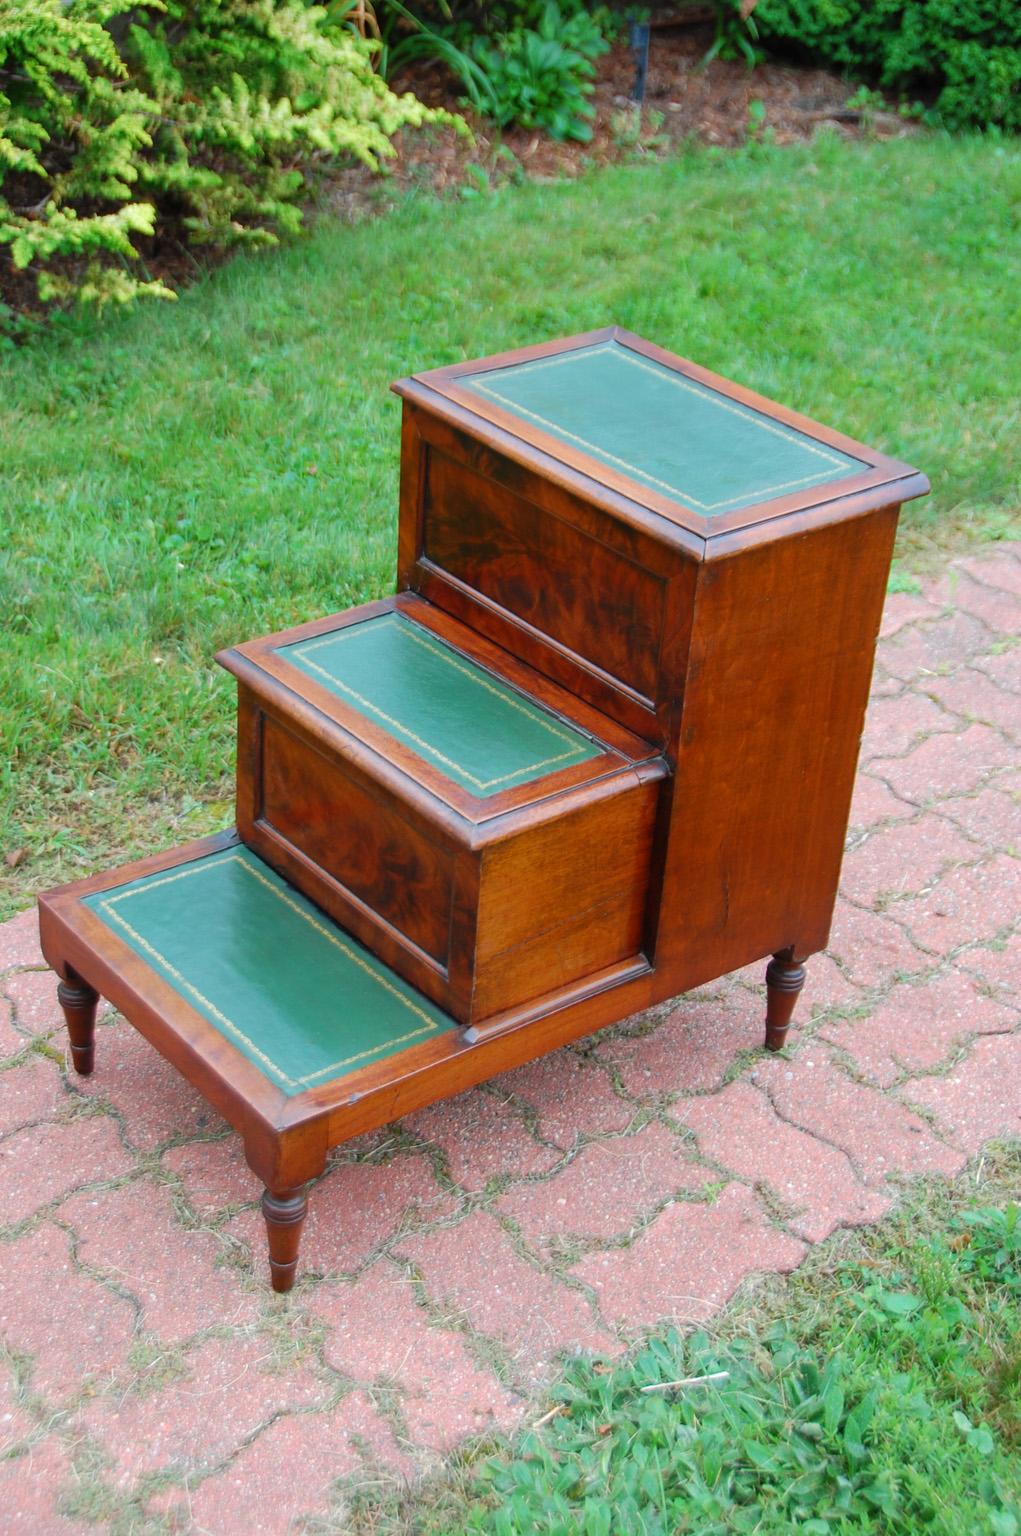 English Regency period flame grain mahogany converted bedstep commode with hand dyed and tooled leather treads. The central step has been converted to a drawer, the tread hinges up, the step slides out and full access to the space is available. The